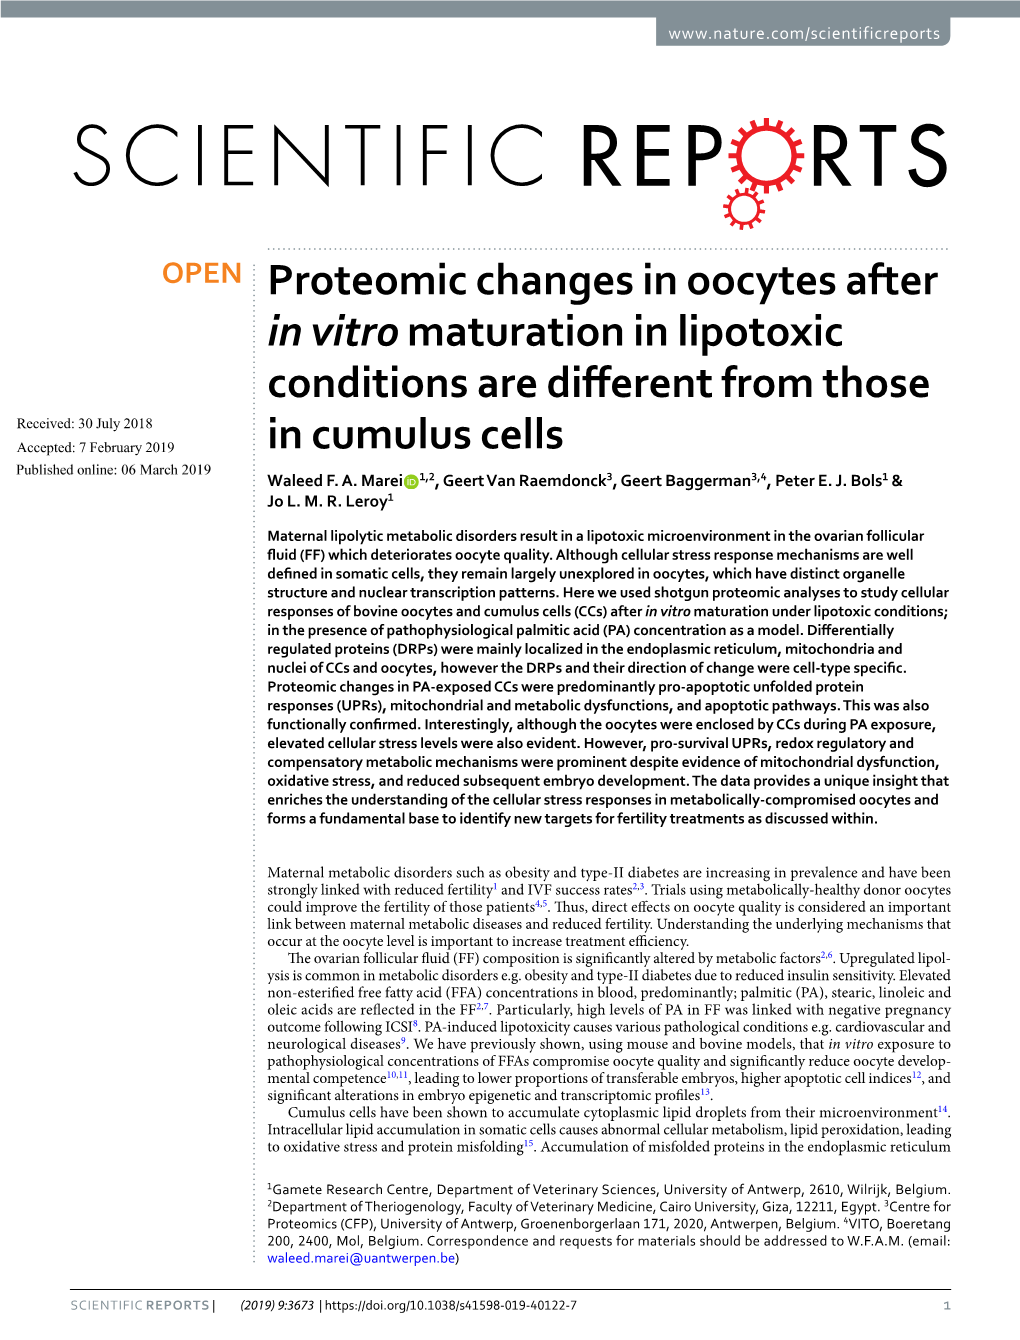 Proteomic Changes in Oocytes After in Vitro Maturation in Lipotoxic